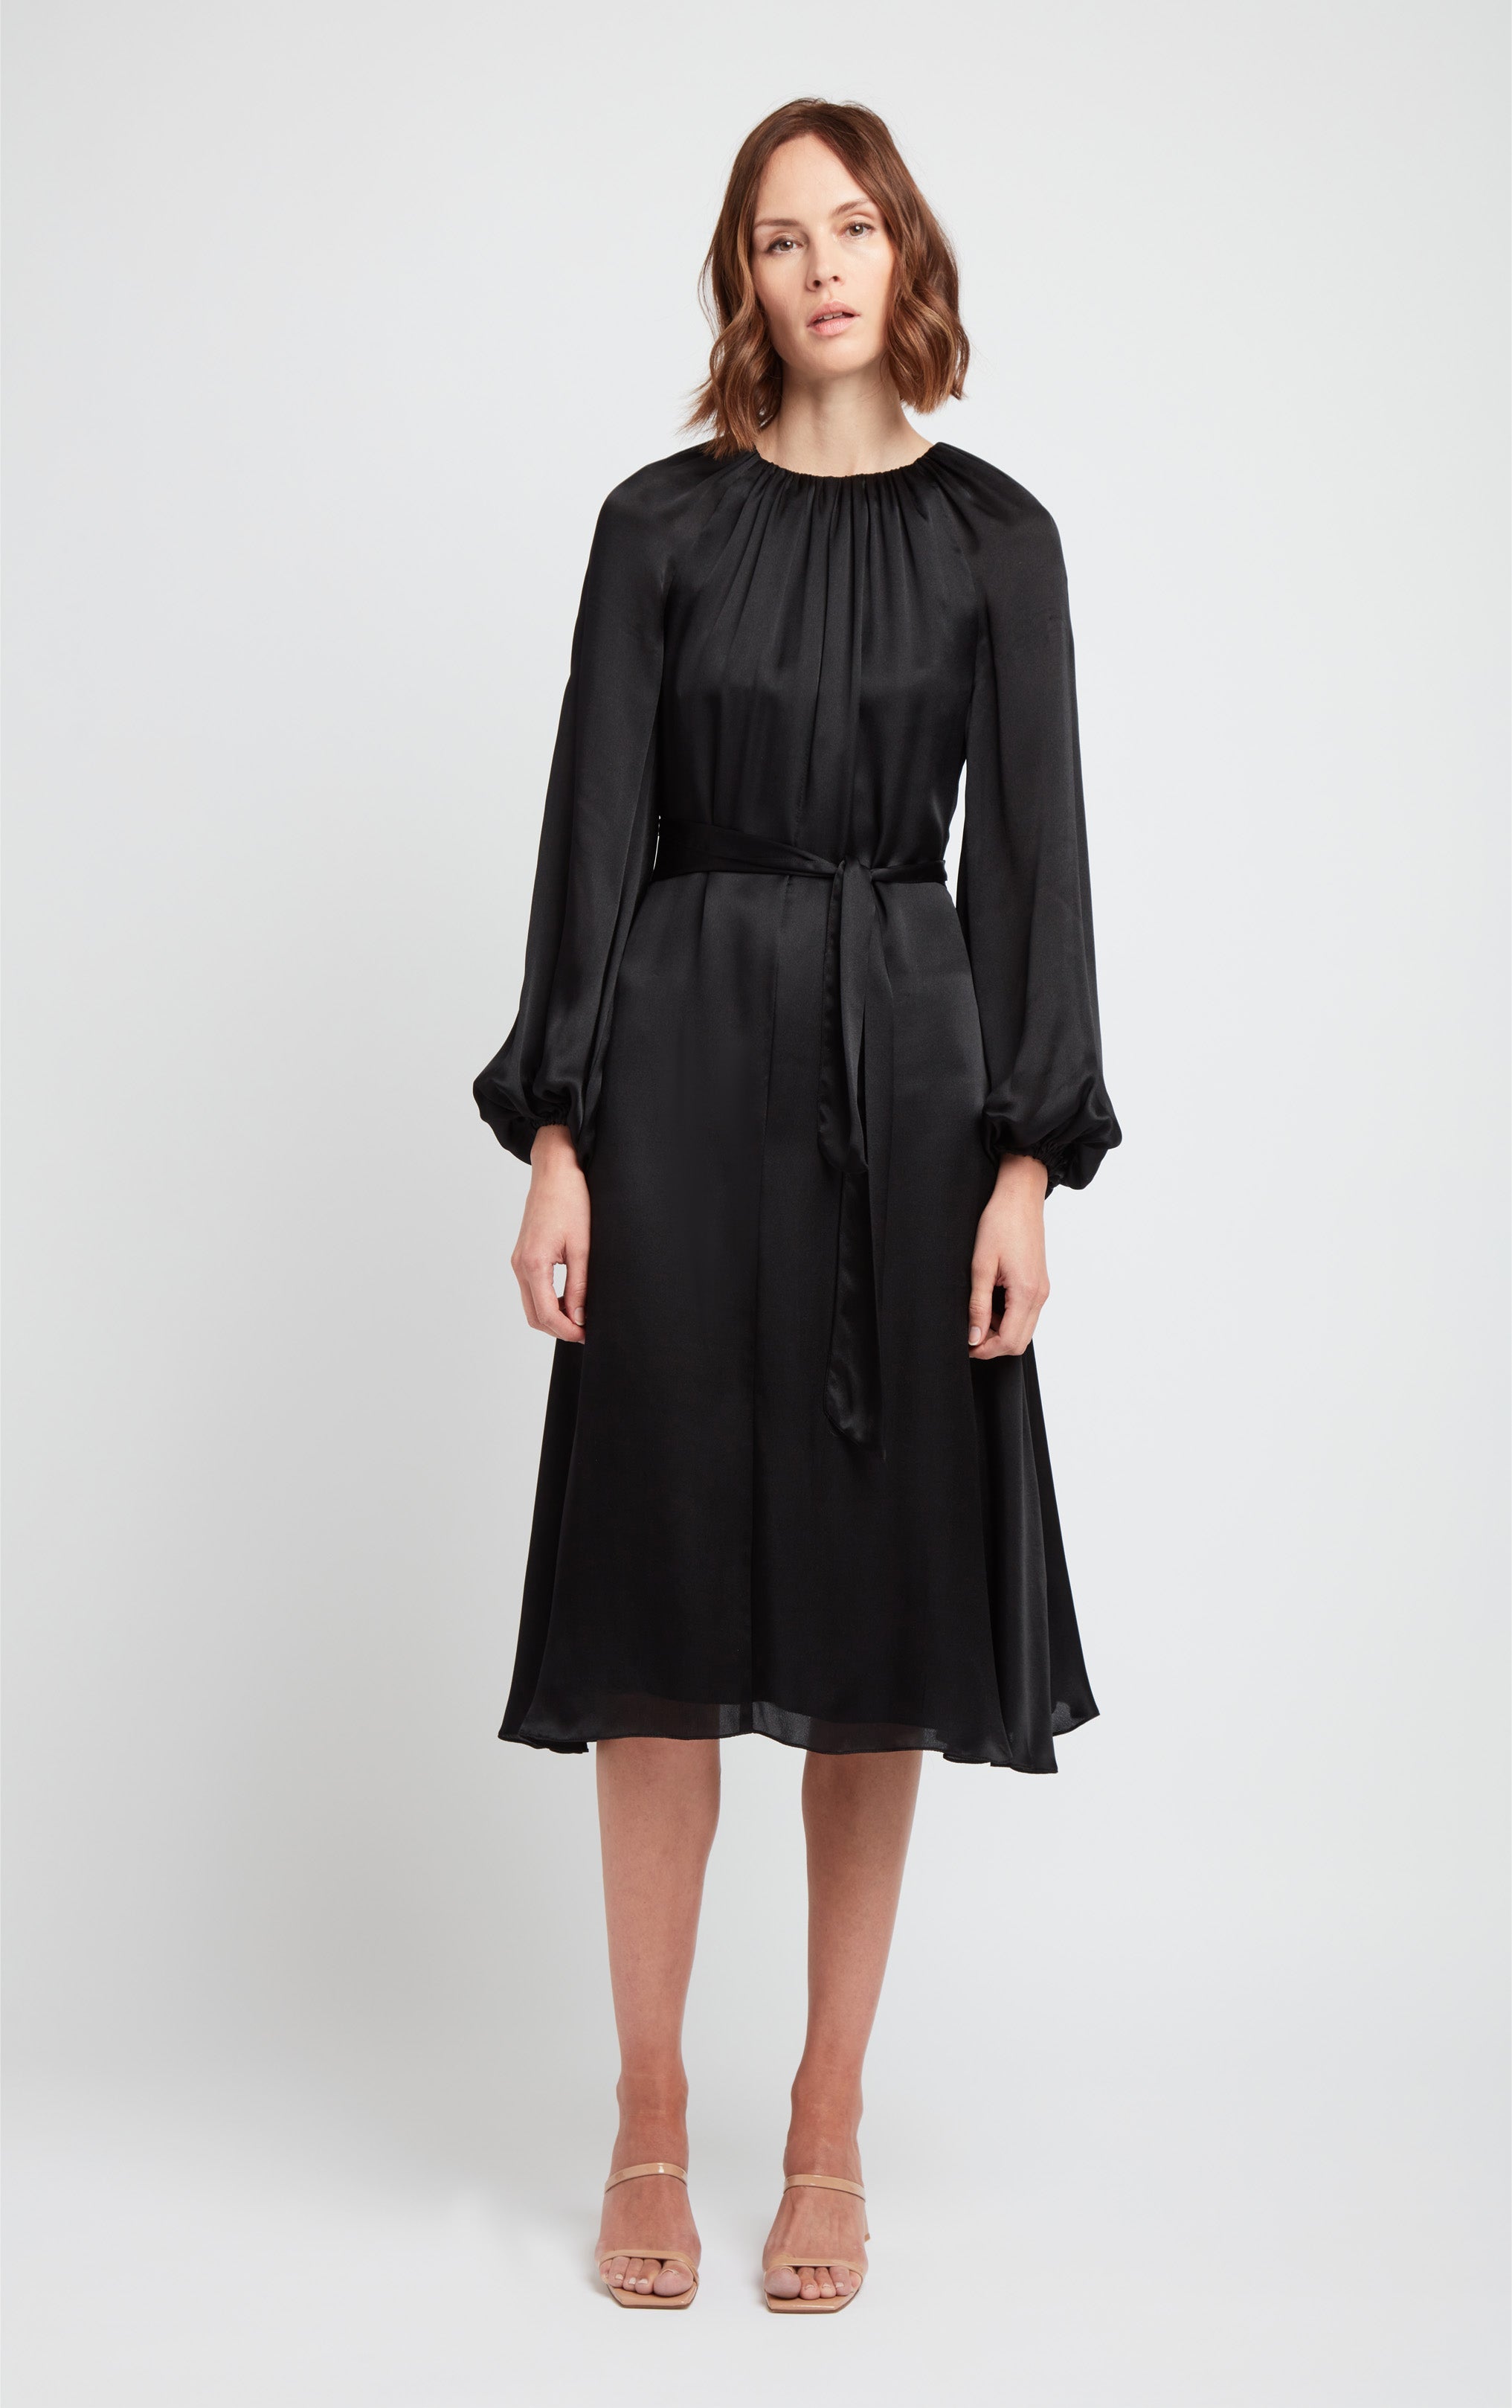 front view of woman wearing black puff sleeve silk dress with rusched neck